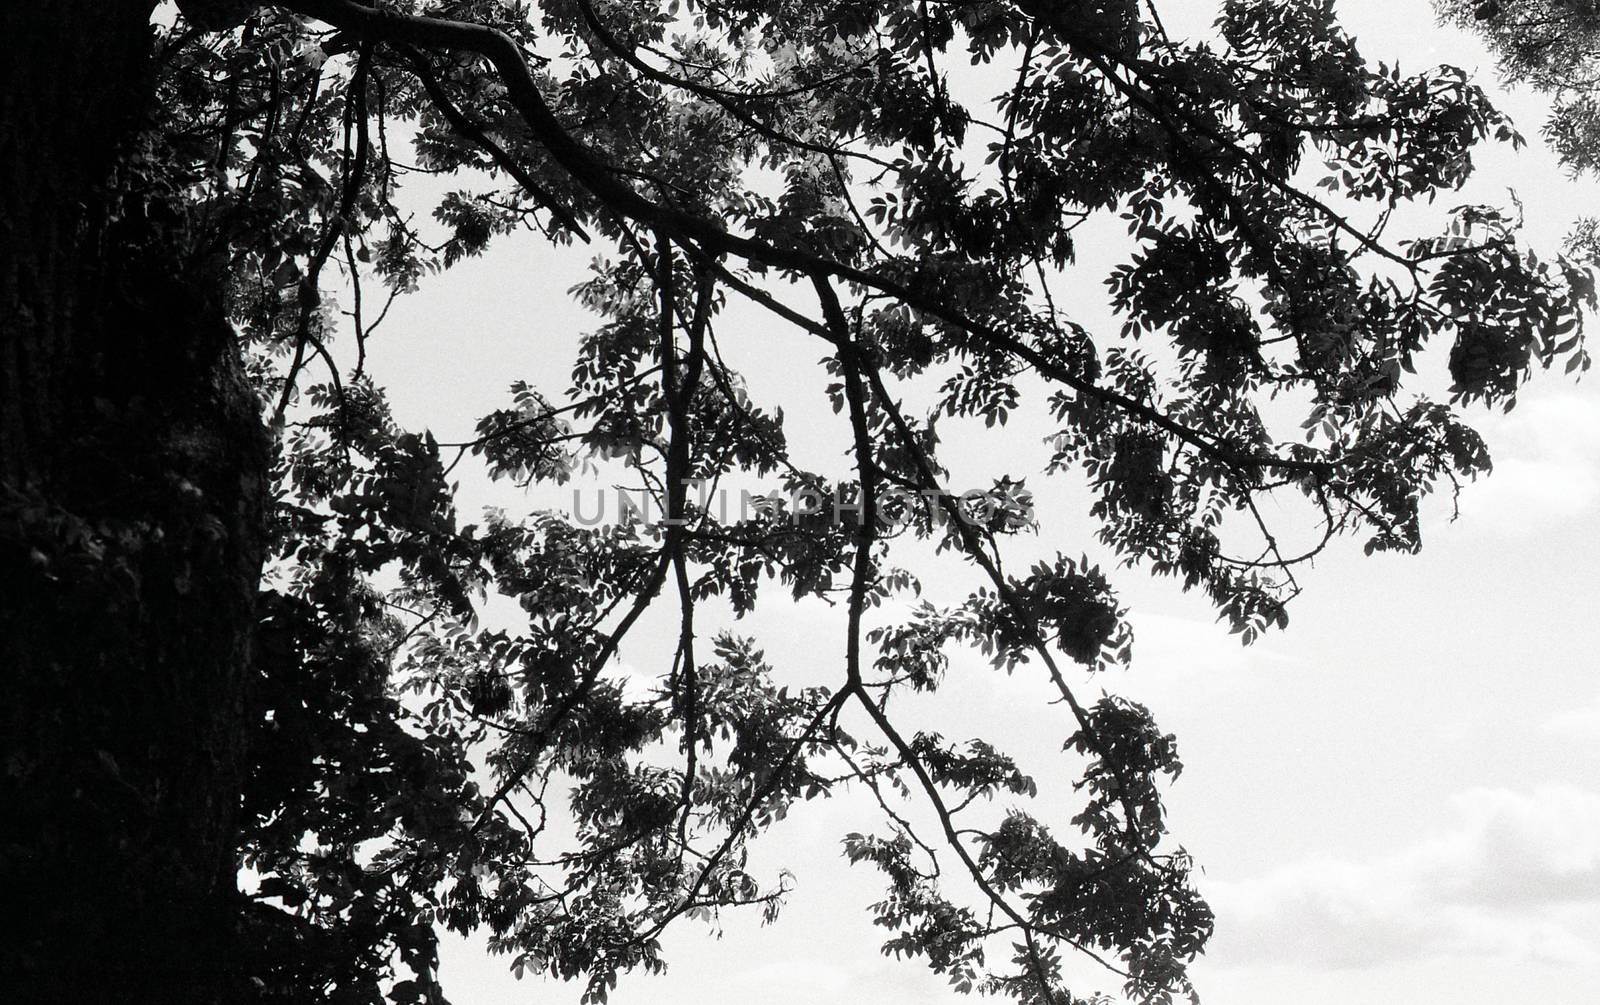 Black and white film image of tree branches against sky